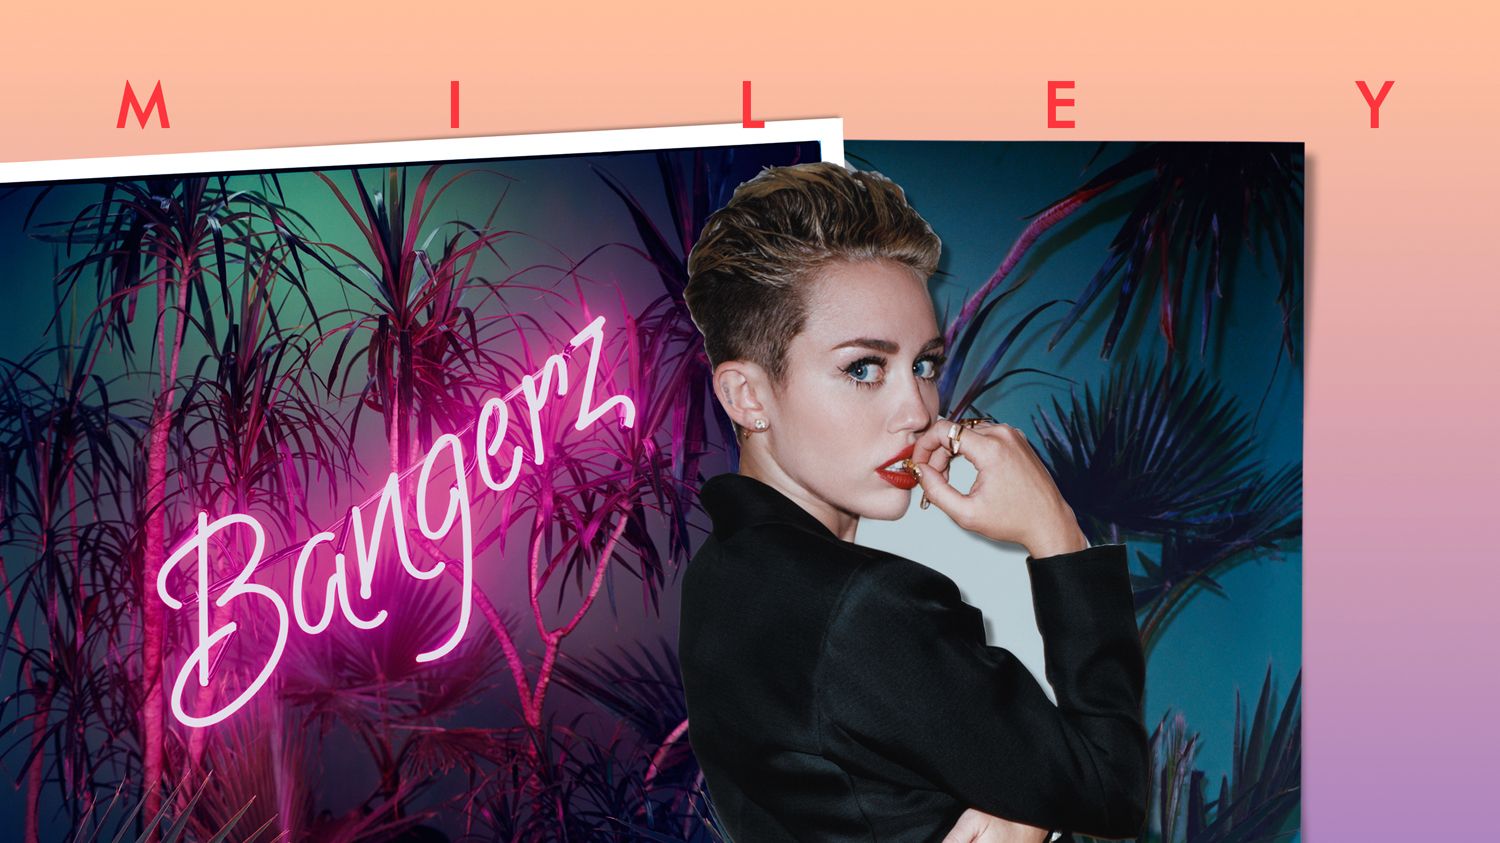 Miley Cyrus is preparing to release her new album, “Bangerz,” which will be released on October 4